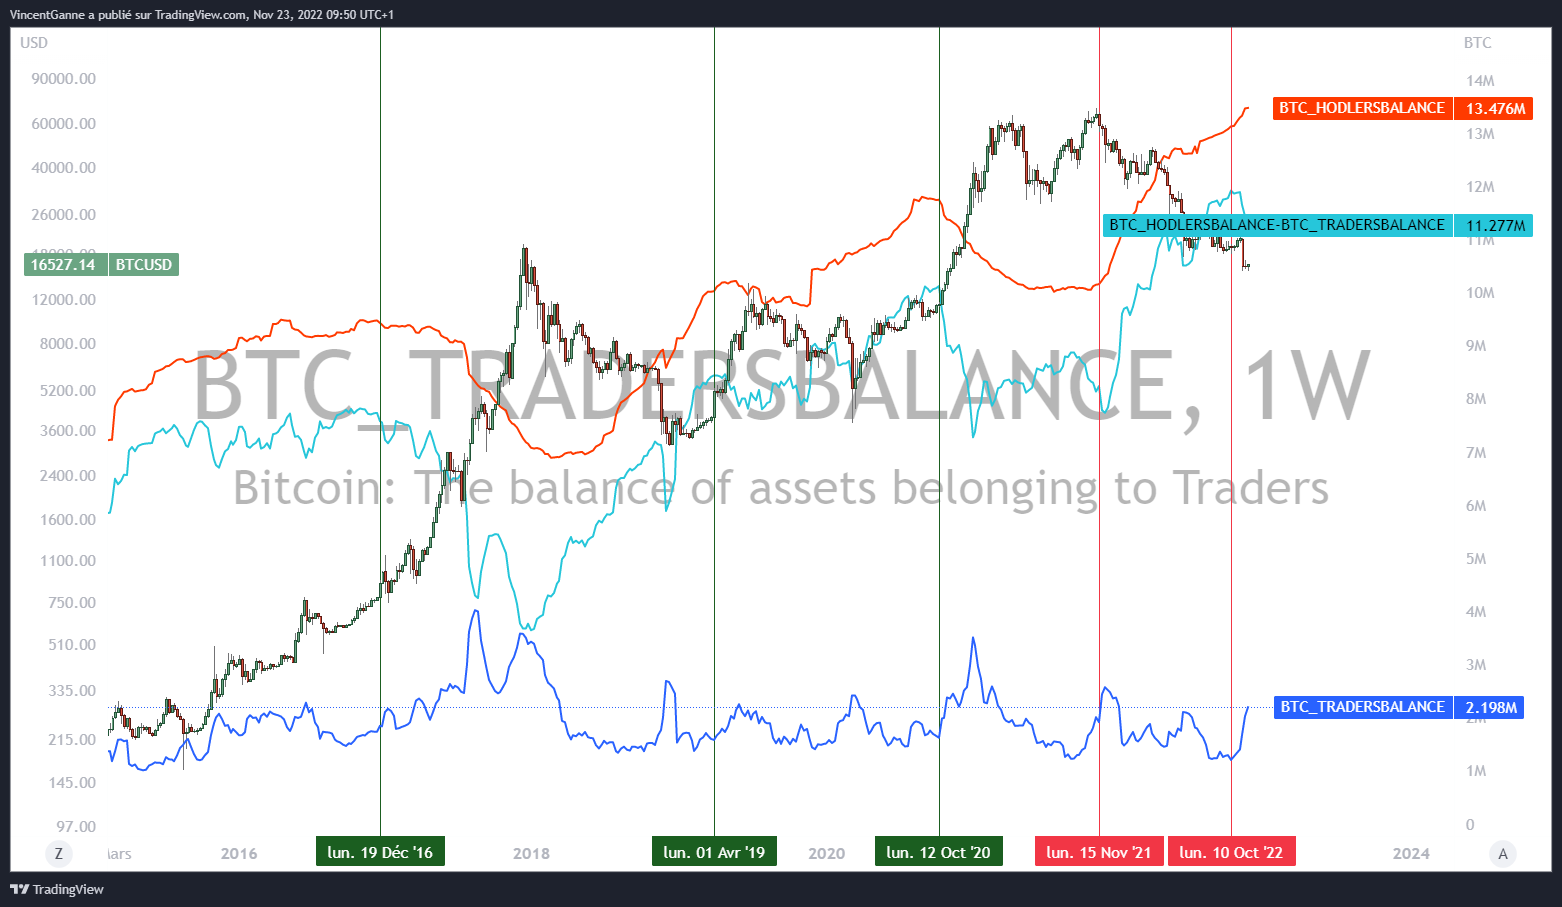 Chart that juxtaposes the price of Bitcoin with the balances of holders and traders